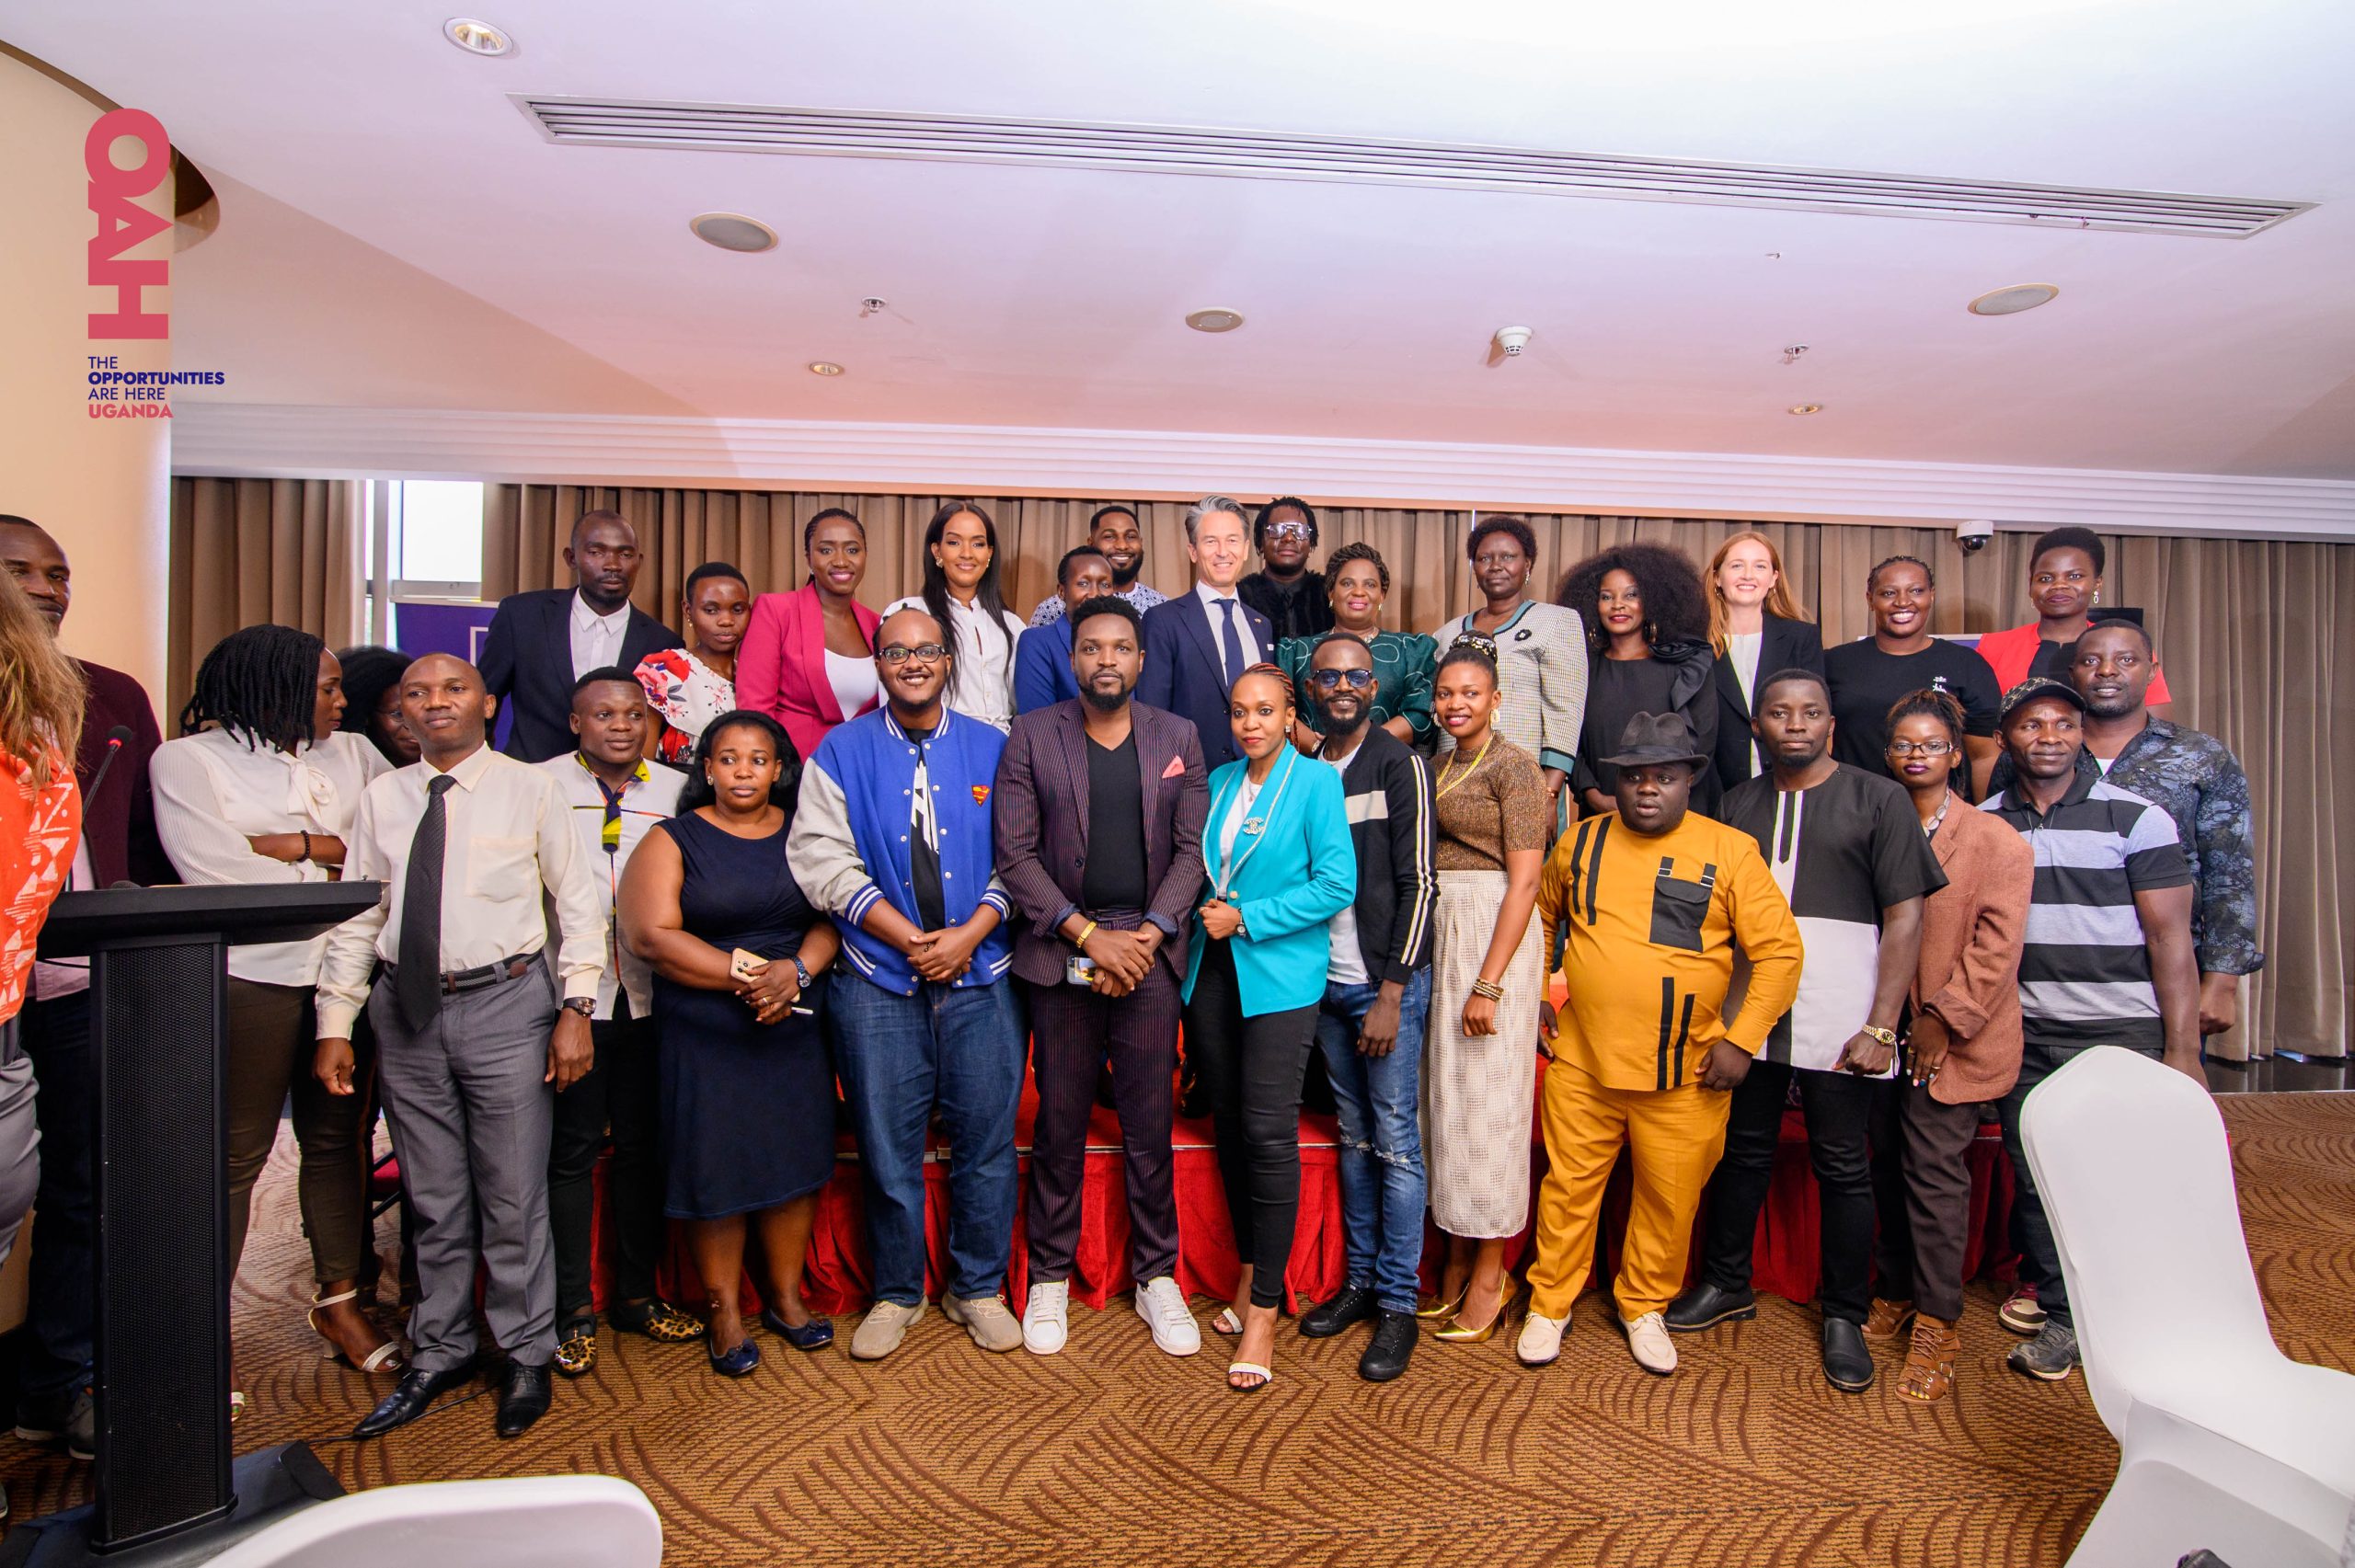 International Trade Centre, European Union Join Forces to Boost the Film Industry